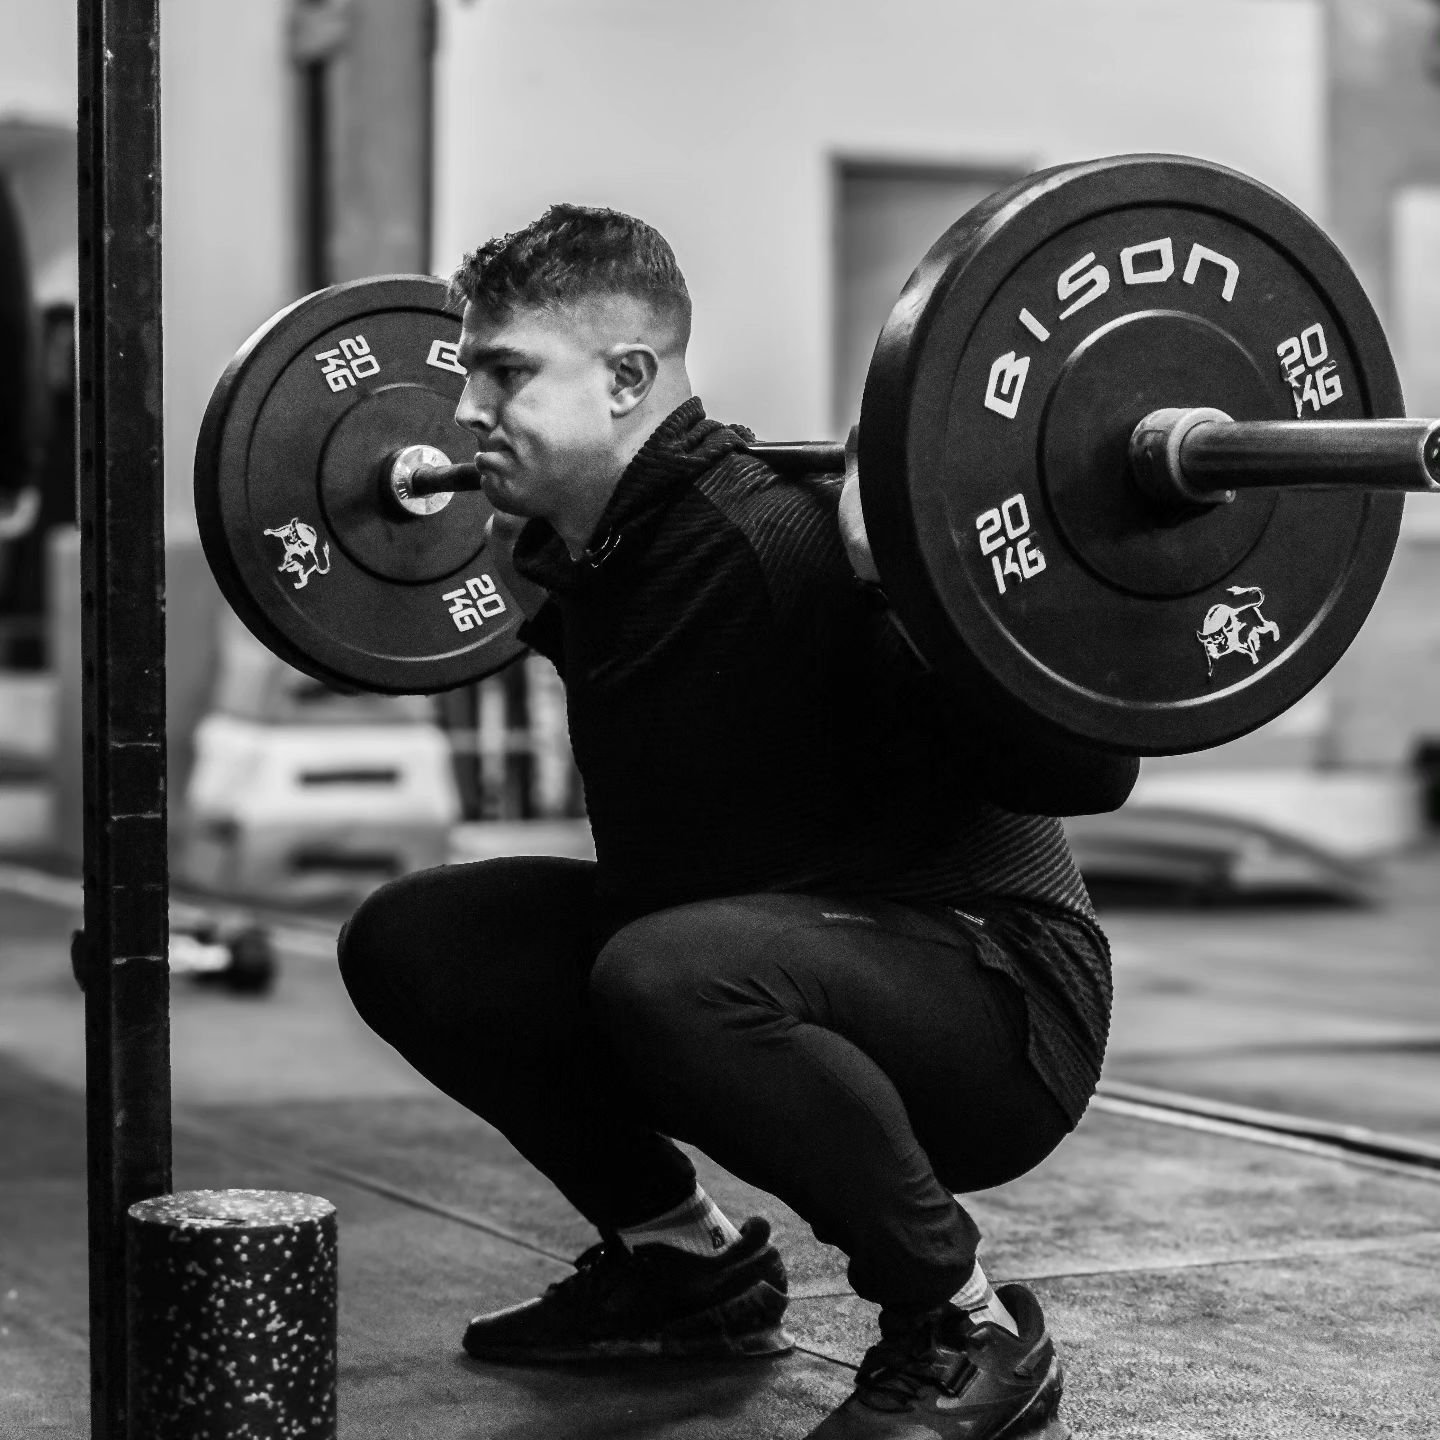 💪 Back Squat Benefits

We are 4 weeks in on our Back Squat cycle, but what benefits do we really get from it? An article by @barbend listed 12 science-backed benefits of the movements that we might know or not know about:

Bigger, stronger legs
A hi